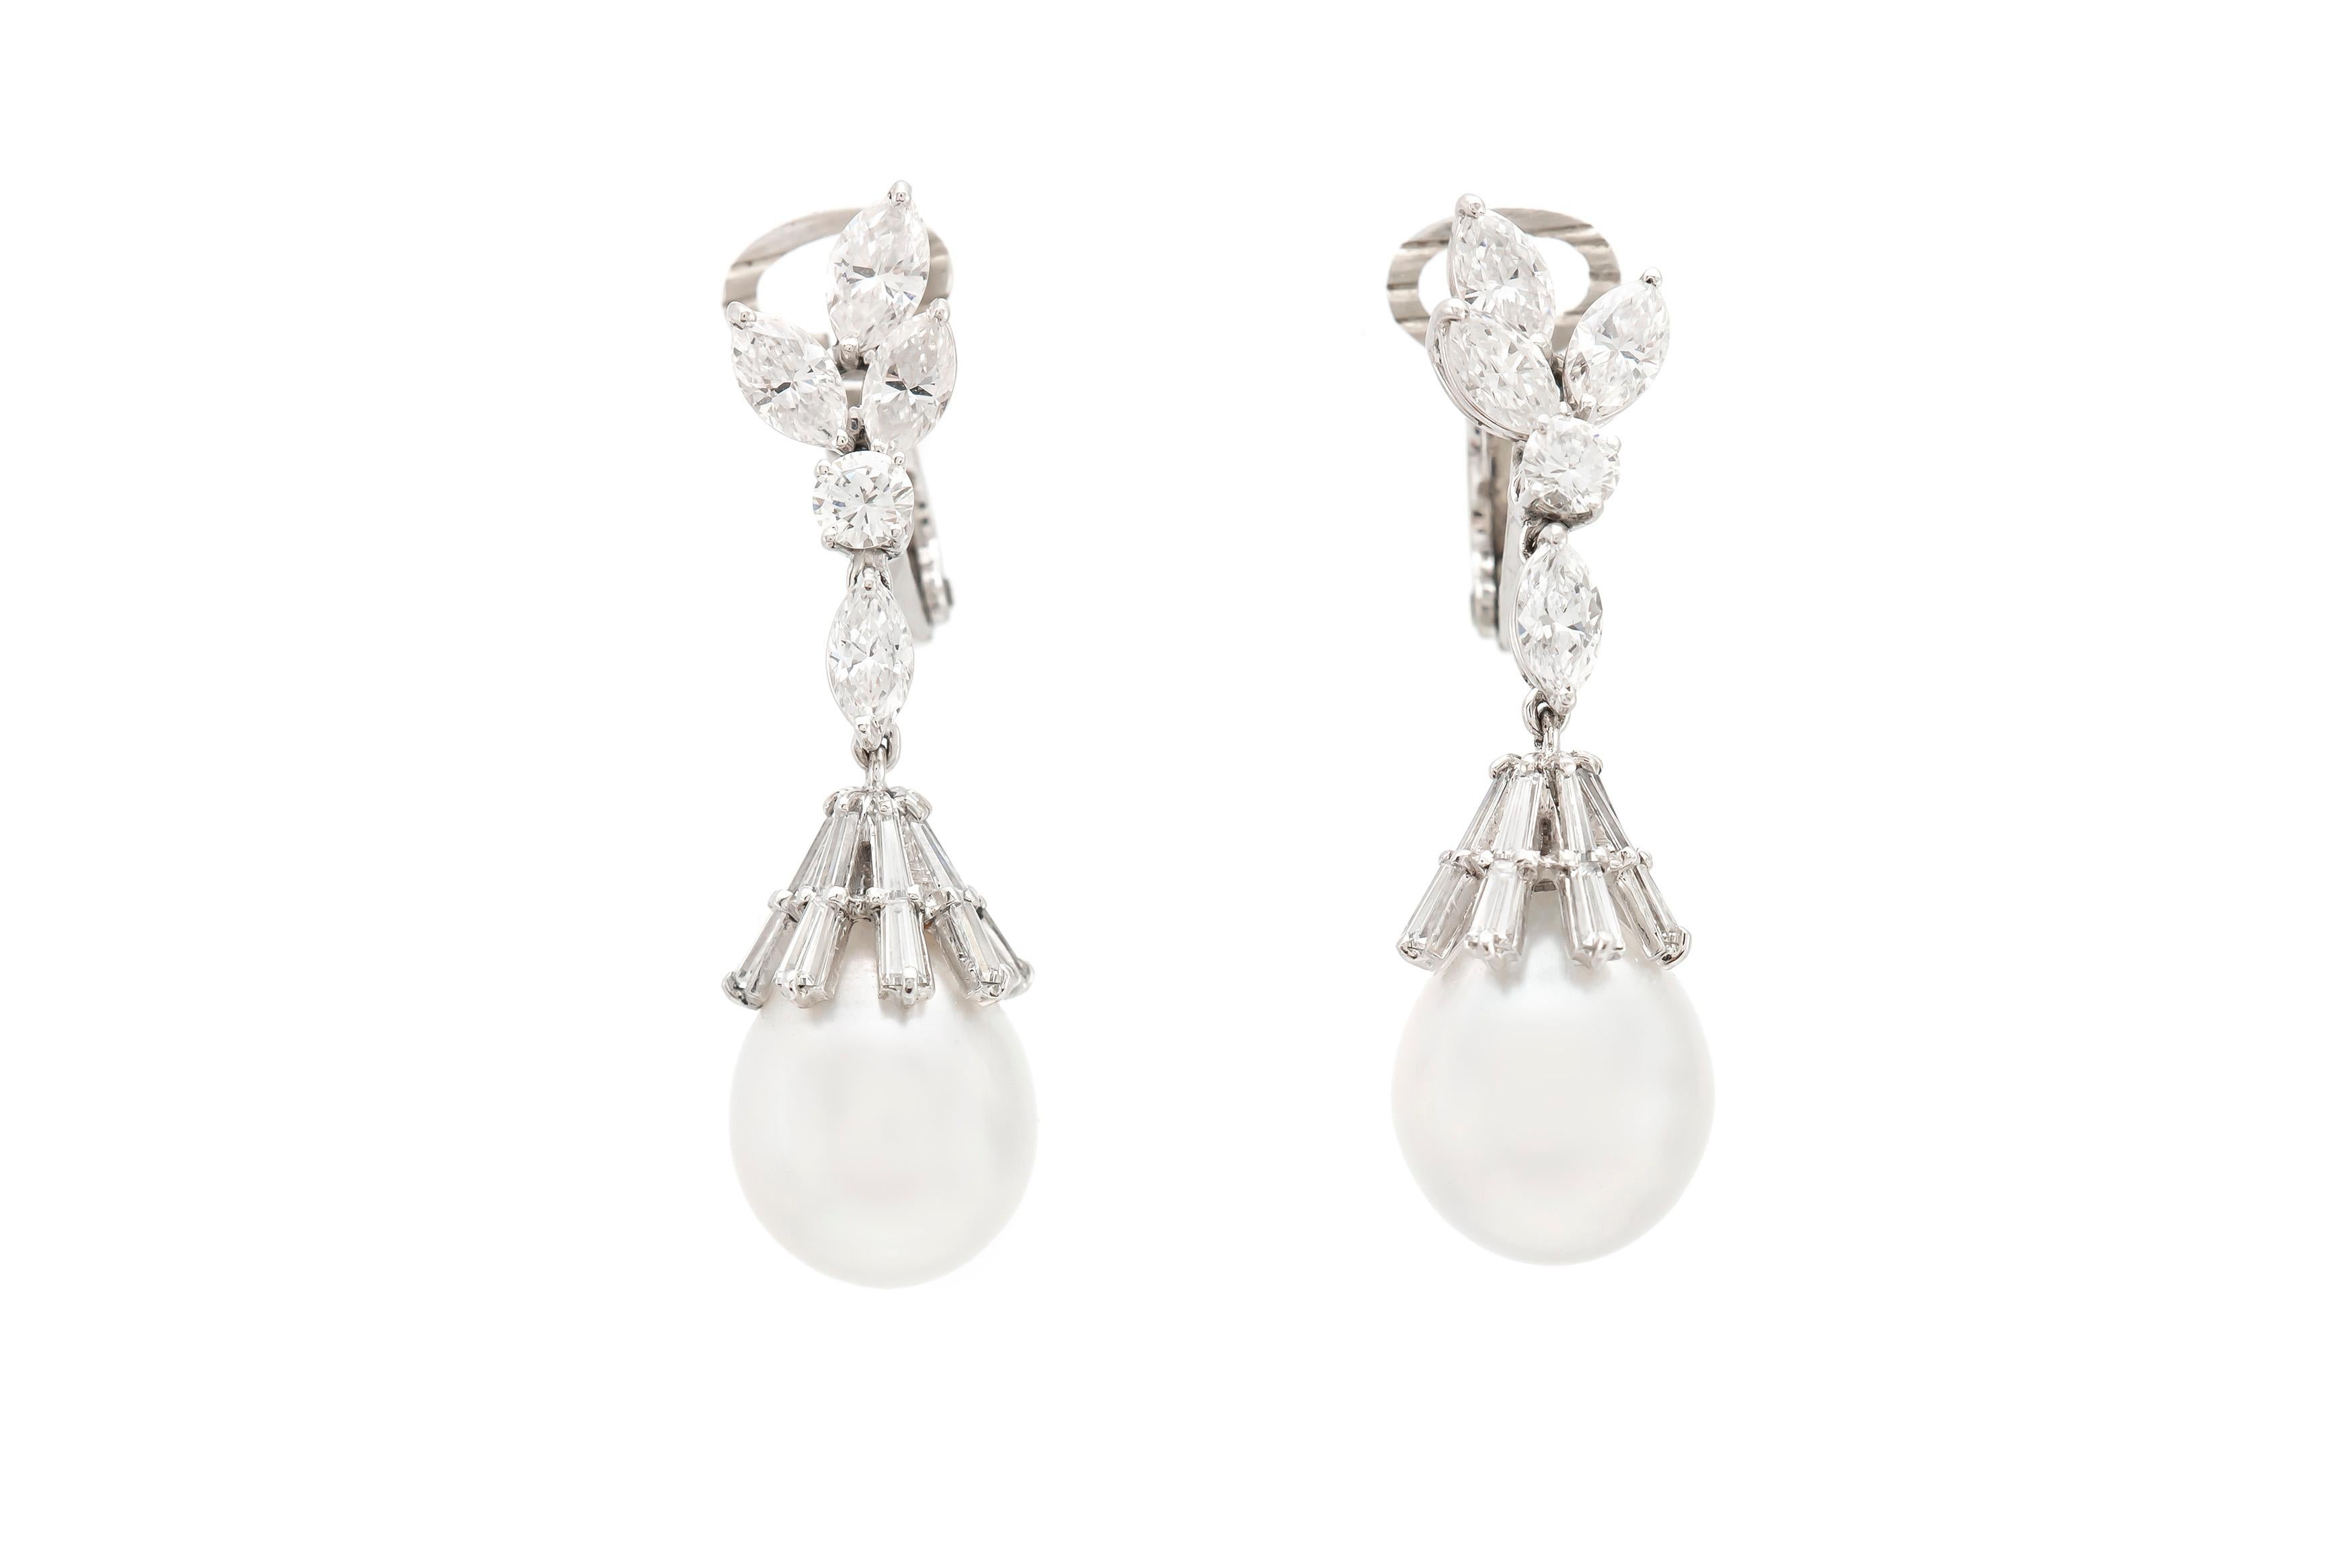 The earrings are finely crafted in platinum with two beautiful pearls and diamonds weighing approximately total of 4.00 carat.